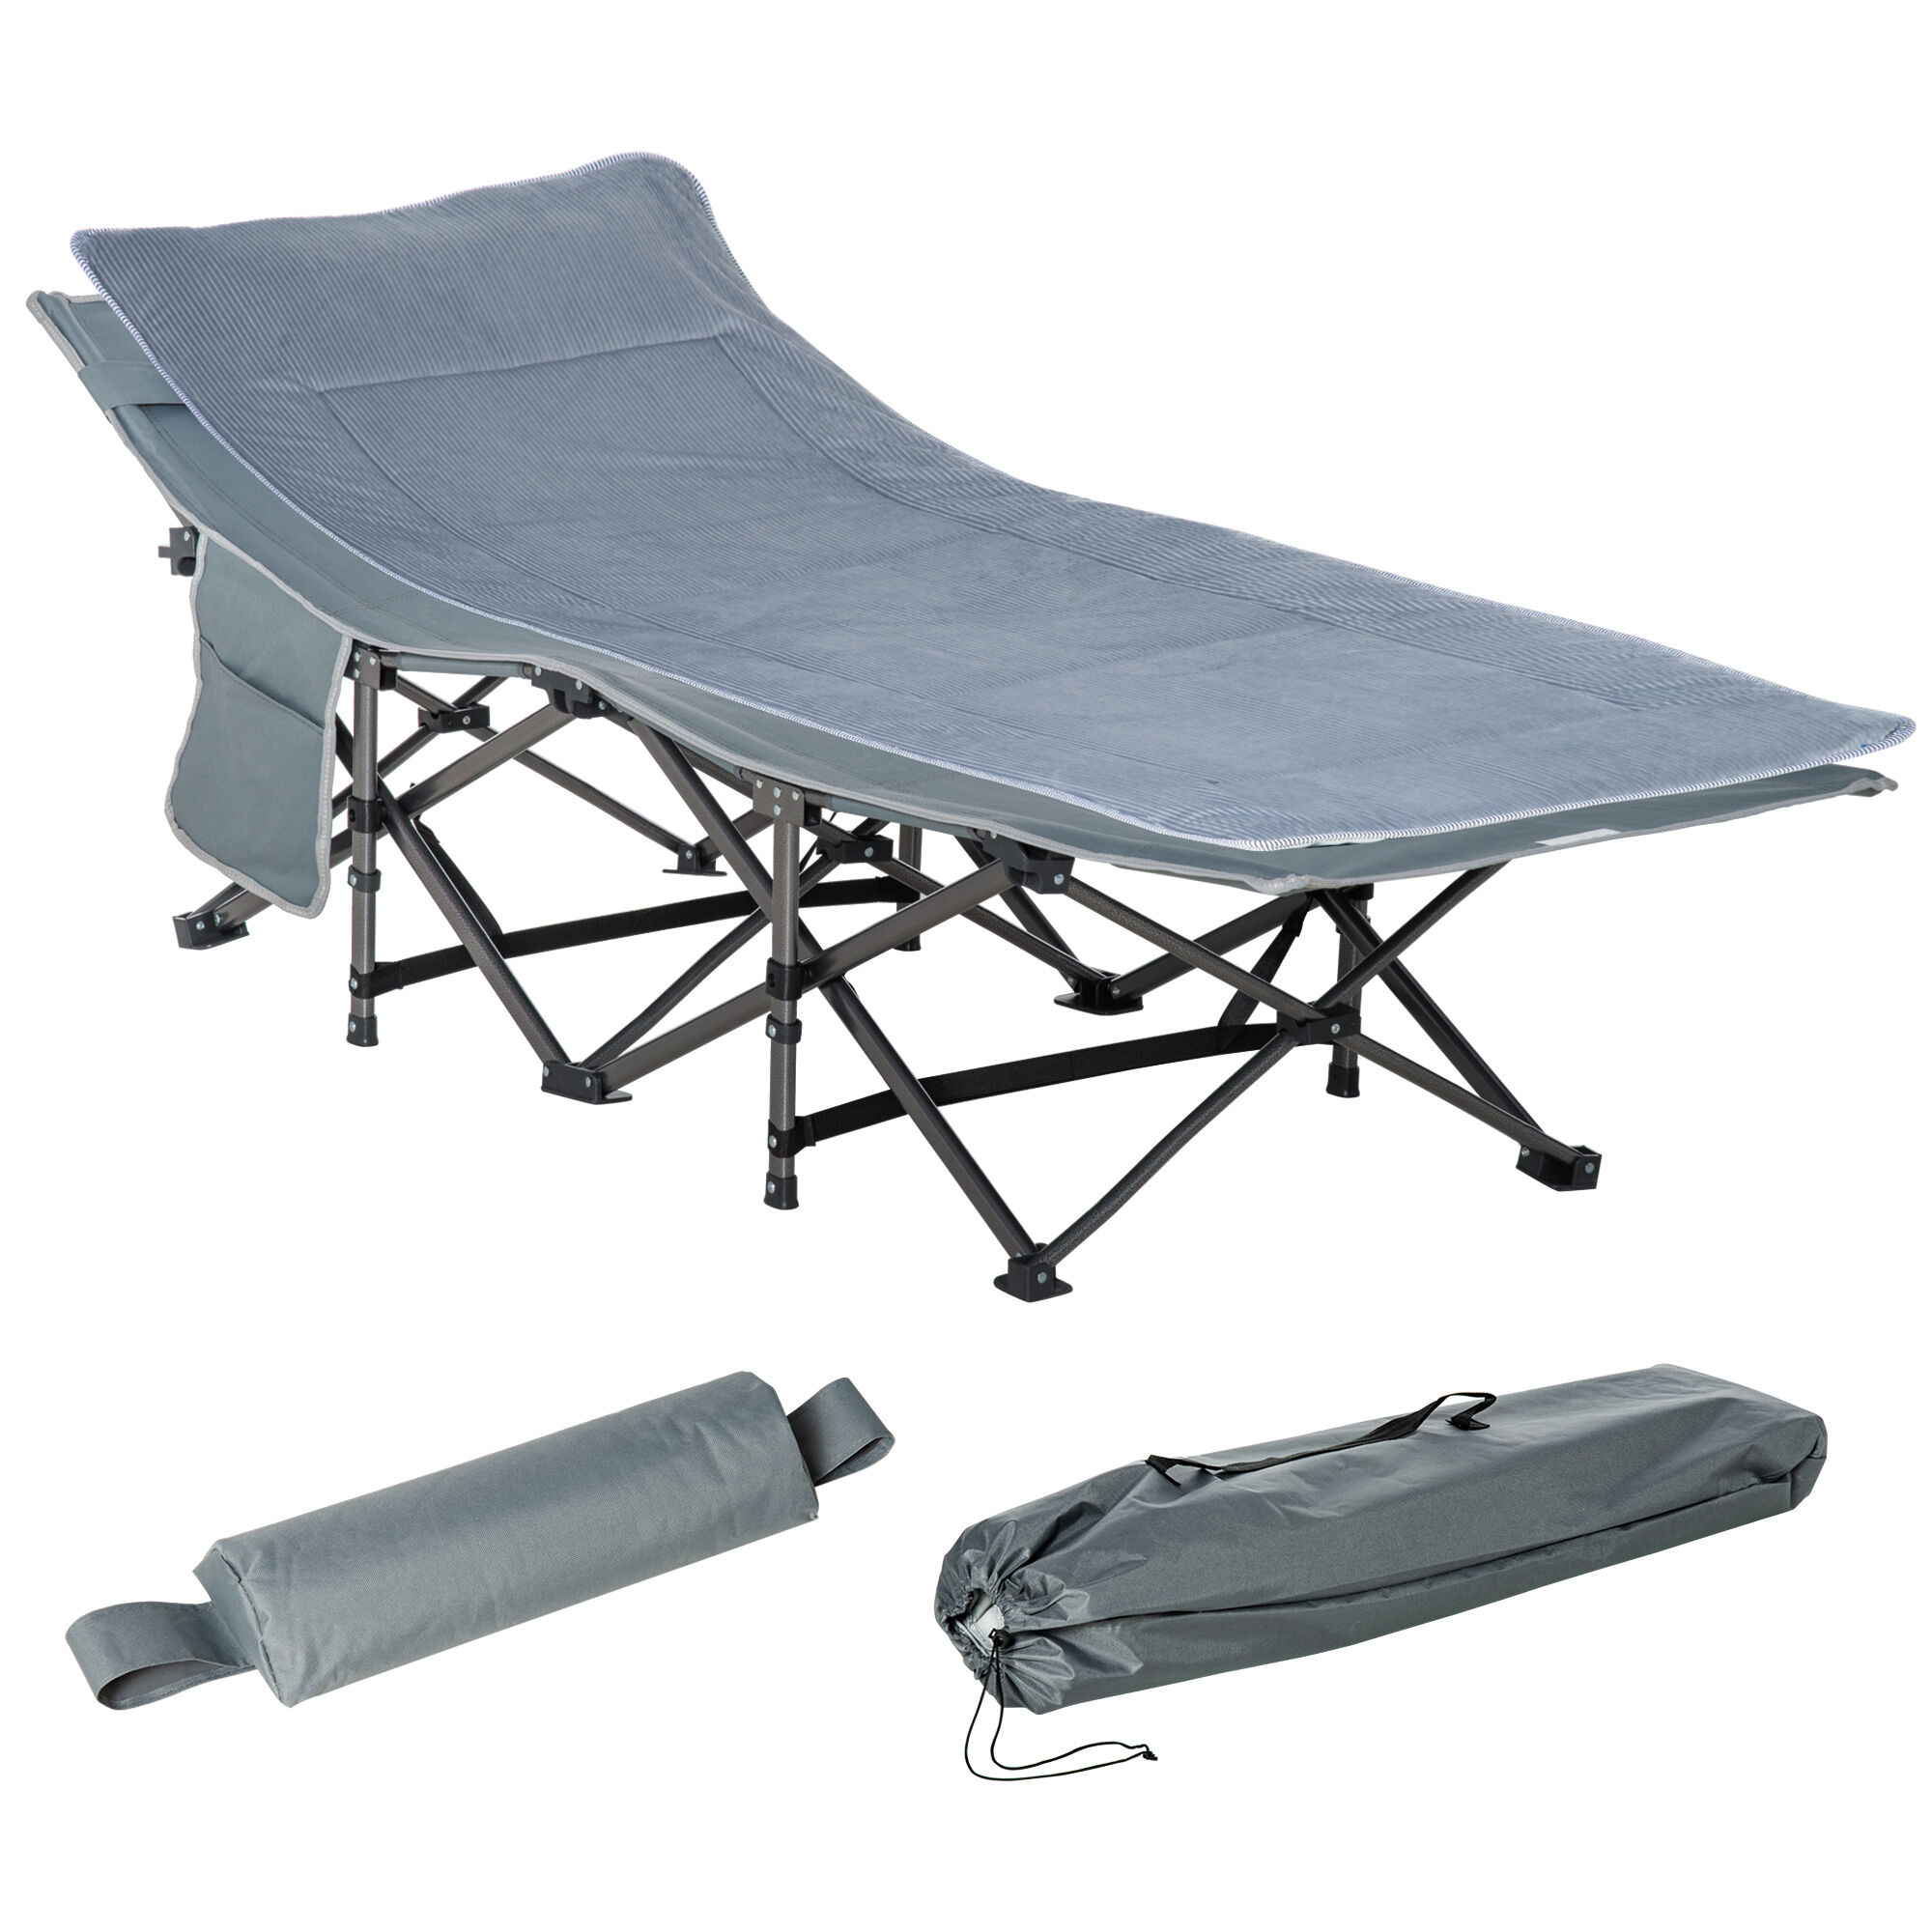 Outsunny Heavy Duty 2 Person Camping Cot with Mattress for Adults With Portable Carrying Bag, Outdoor Folding Lightweight Sleeping Bed, Grey